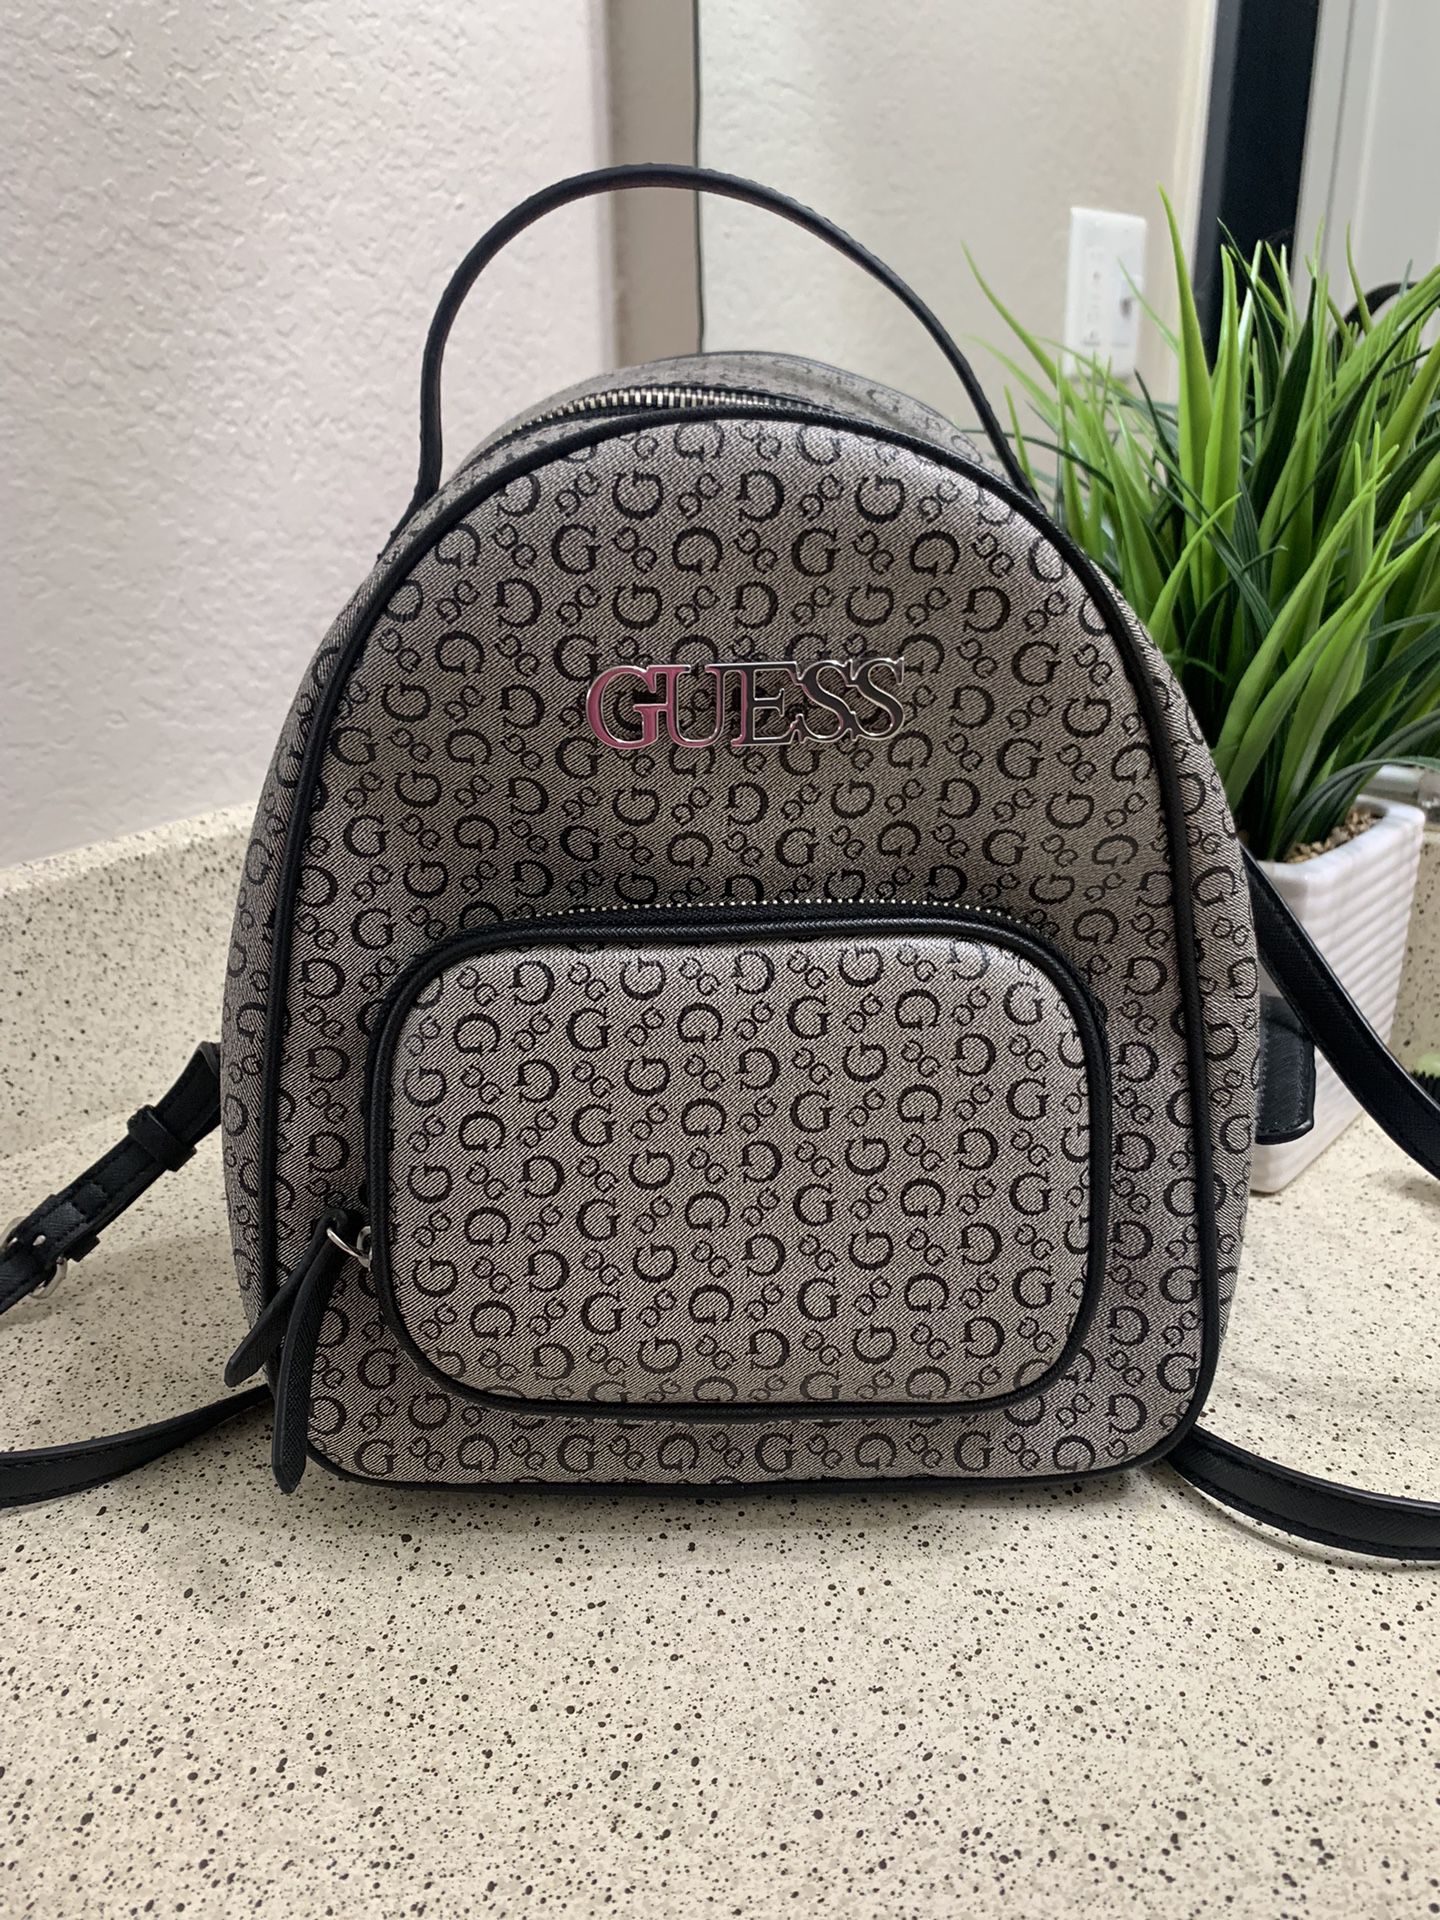 Woman’s Guess Backpack